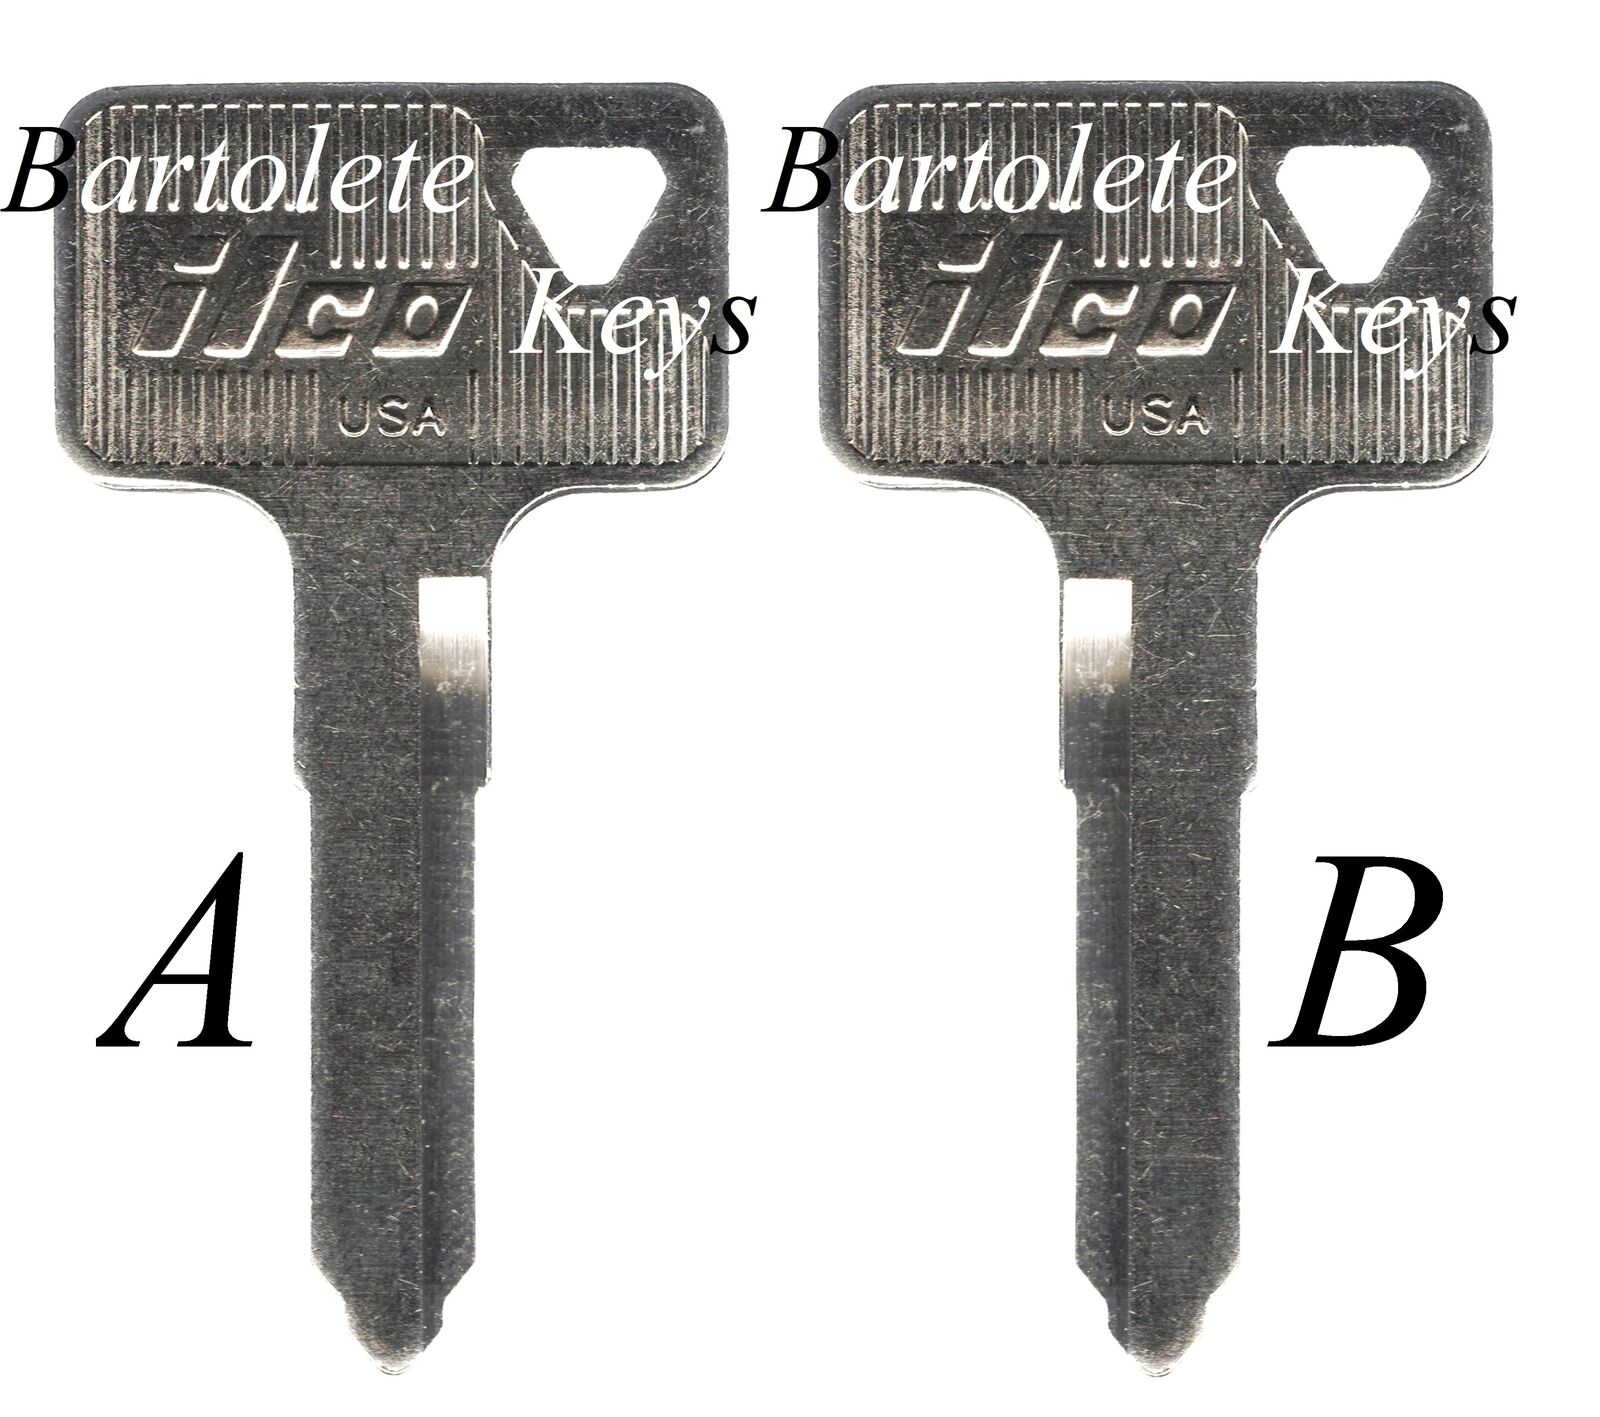 Replacement Key Blank Fits 2008 2009 2010 Kawasaki ZG 1400 Concours 14